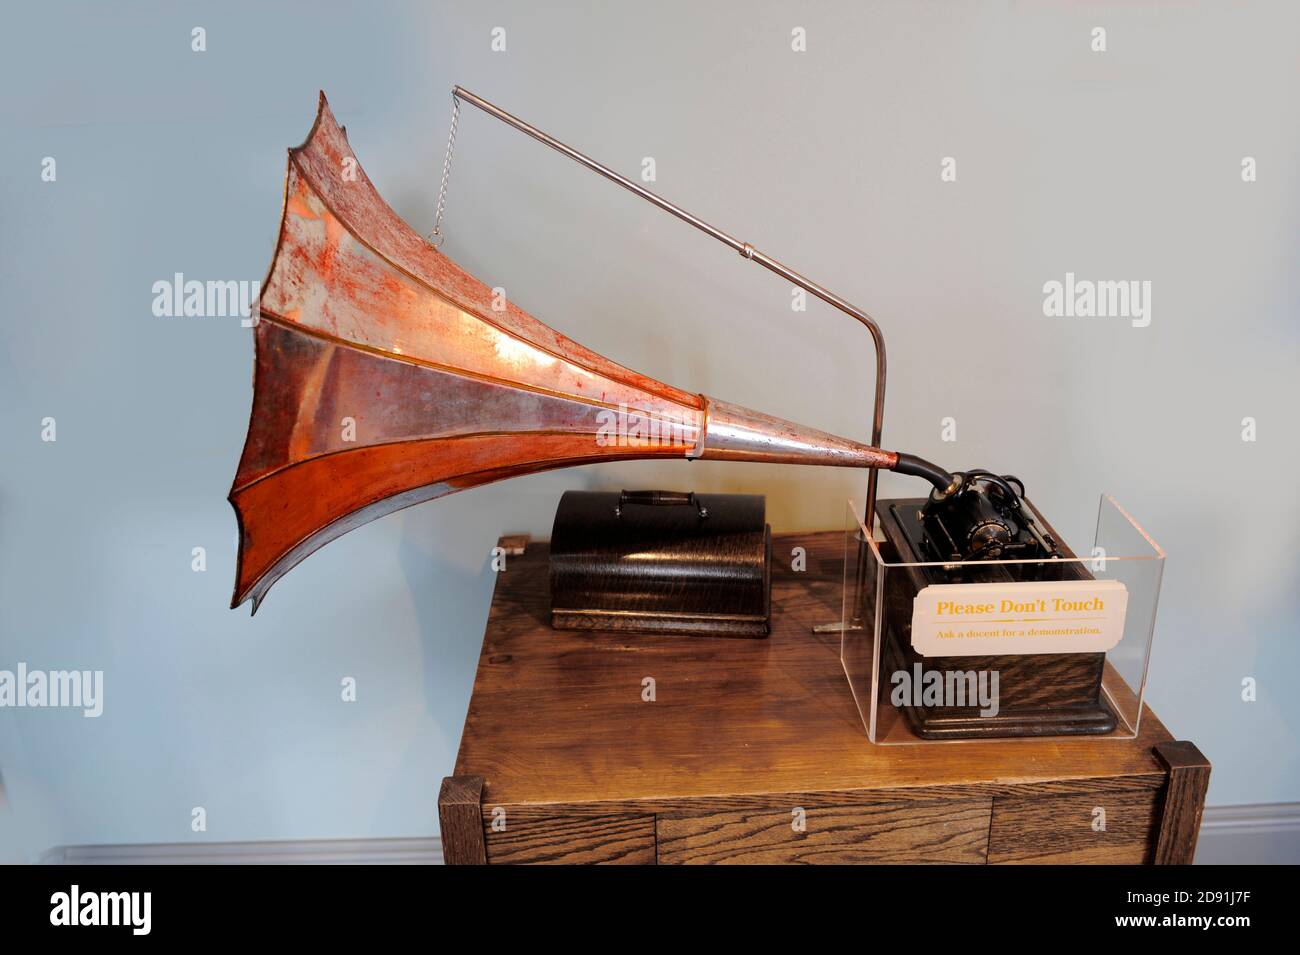 Early phonograph or record player invented by Thomas Elva Edison is on display in a museum in his boyhood town of Port Huron Michigan Stock Photo